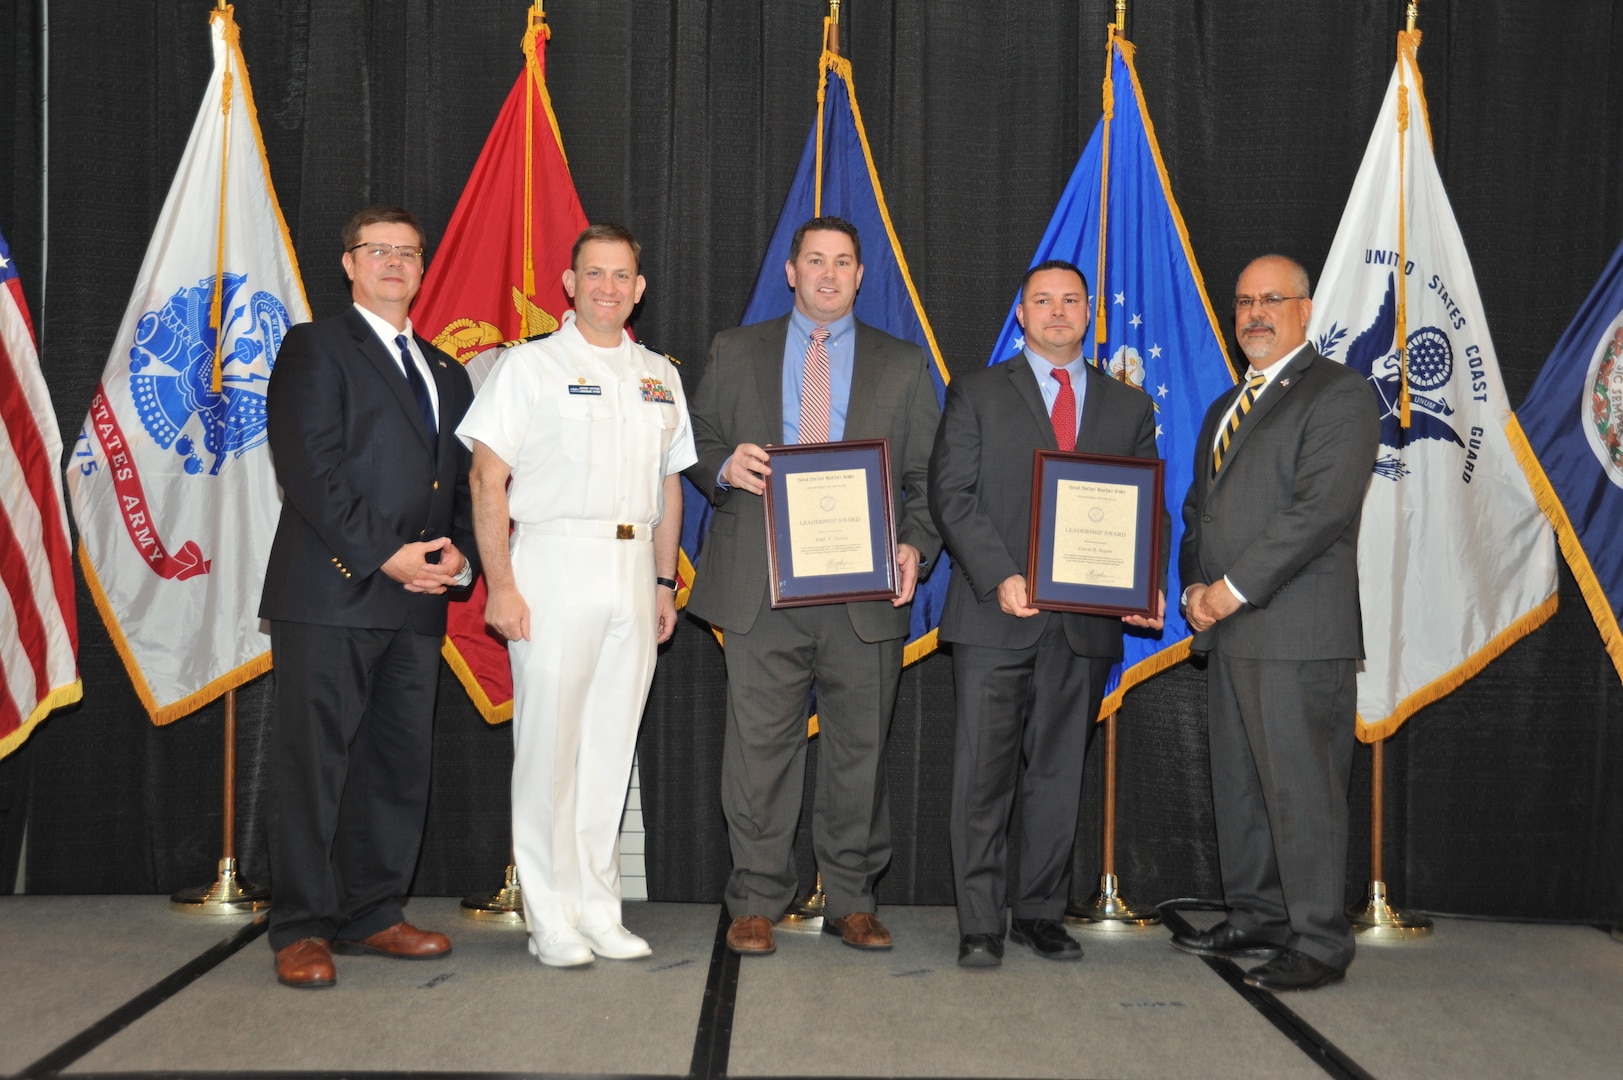 IMAGE: Edwin Regan and Todd Graves are presented the Leadership Award at Naval Surface Warfare Center Dahlgren Division's annual awards ceremony, Apr. 26 at the Fredericksburg Expo and Conference Center.